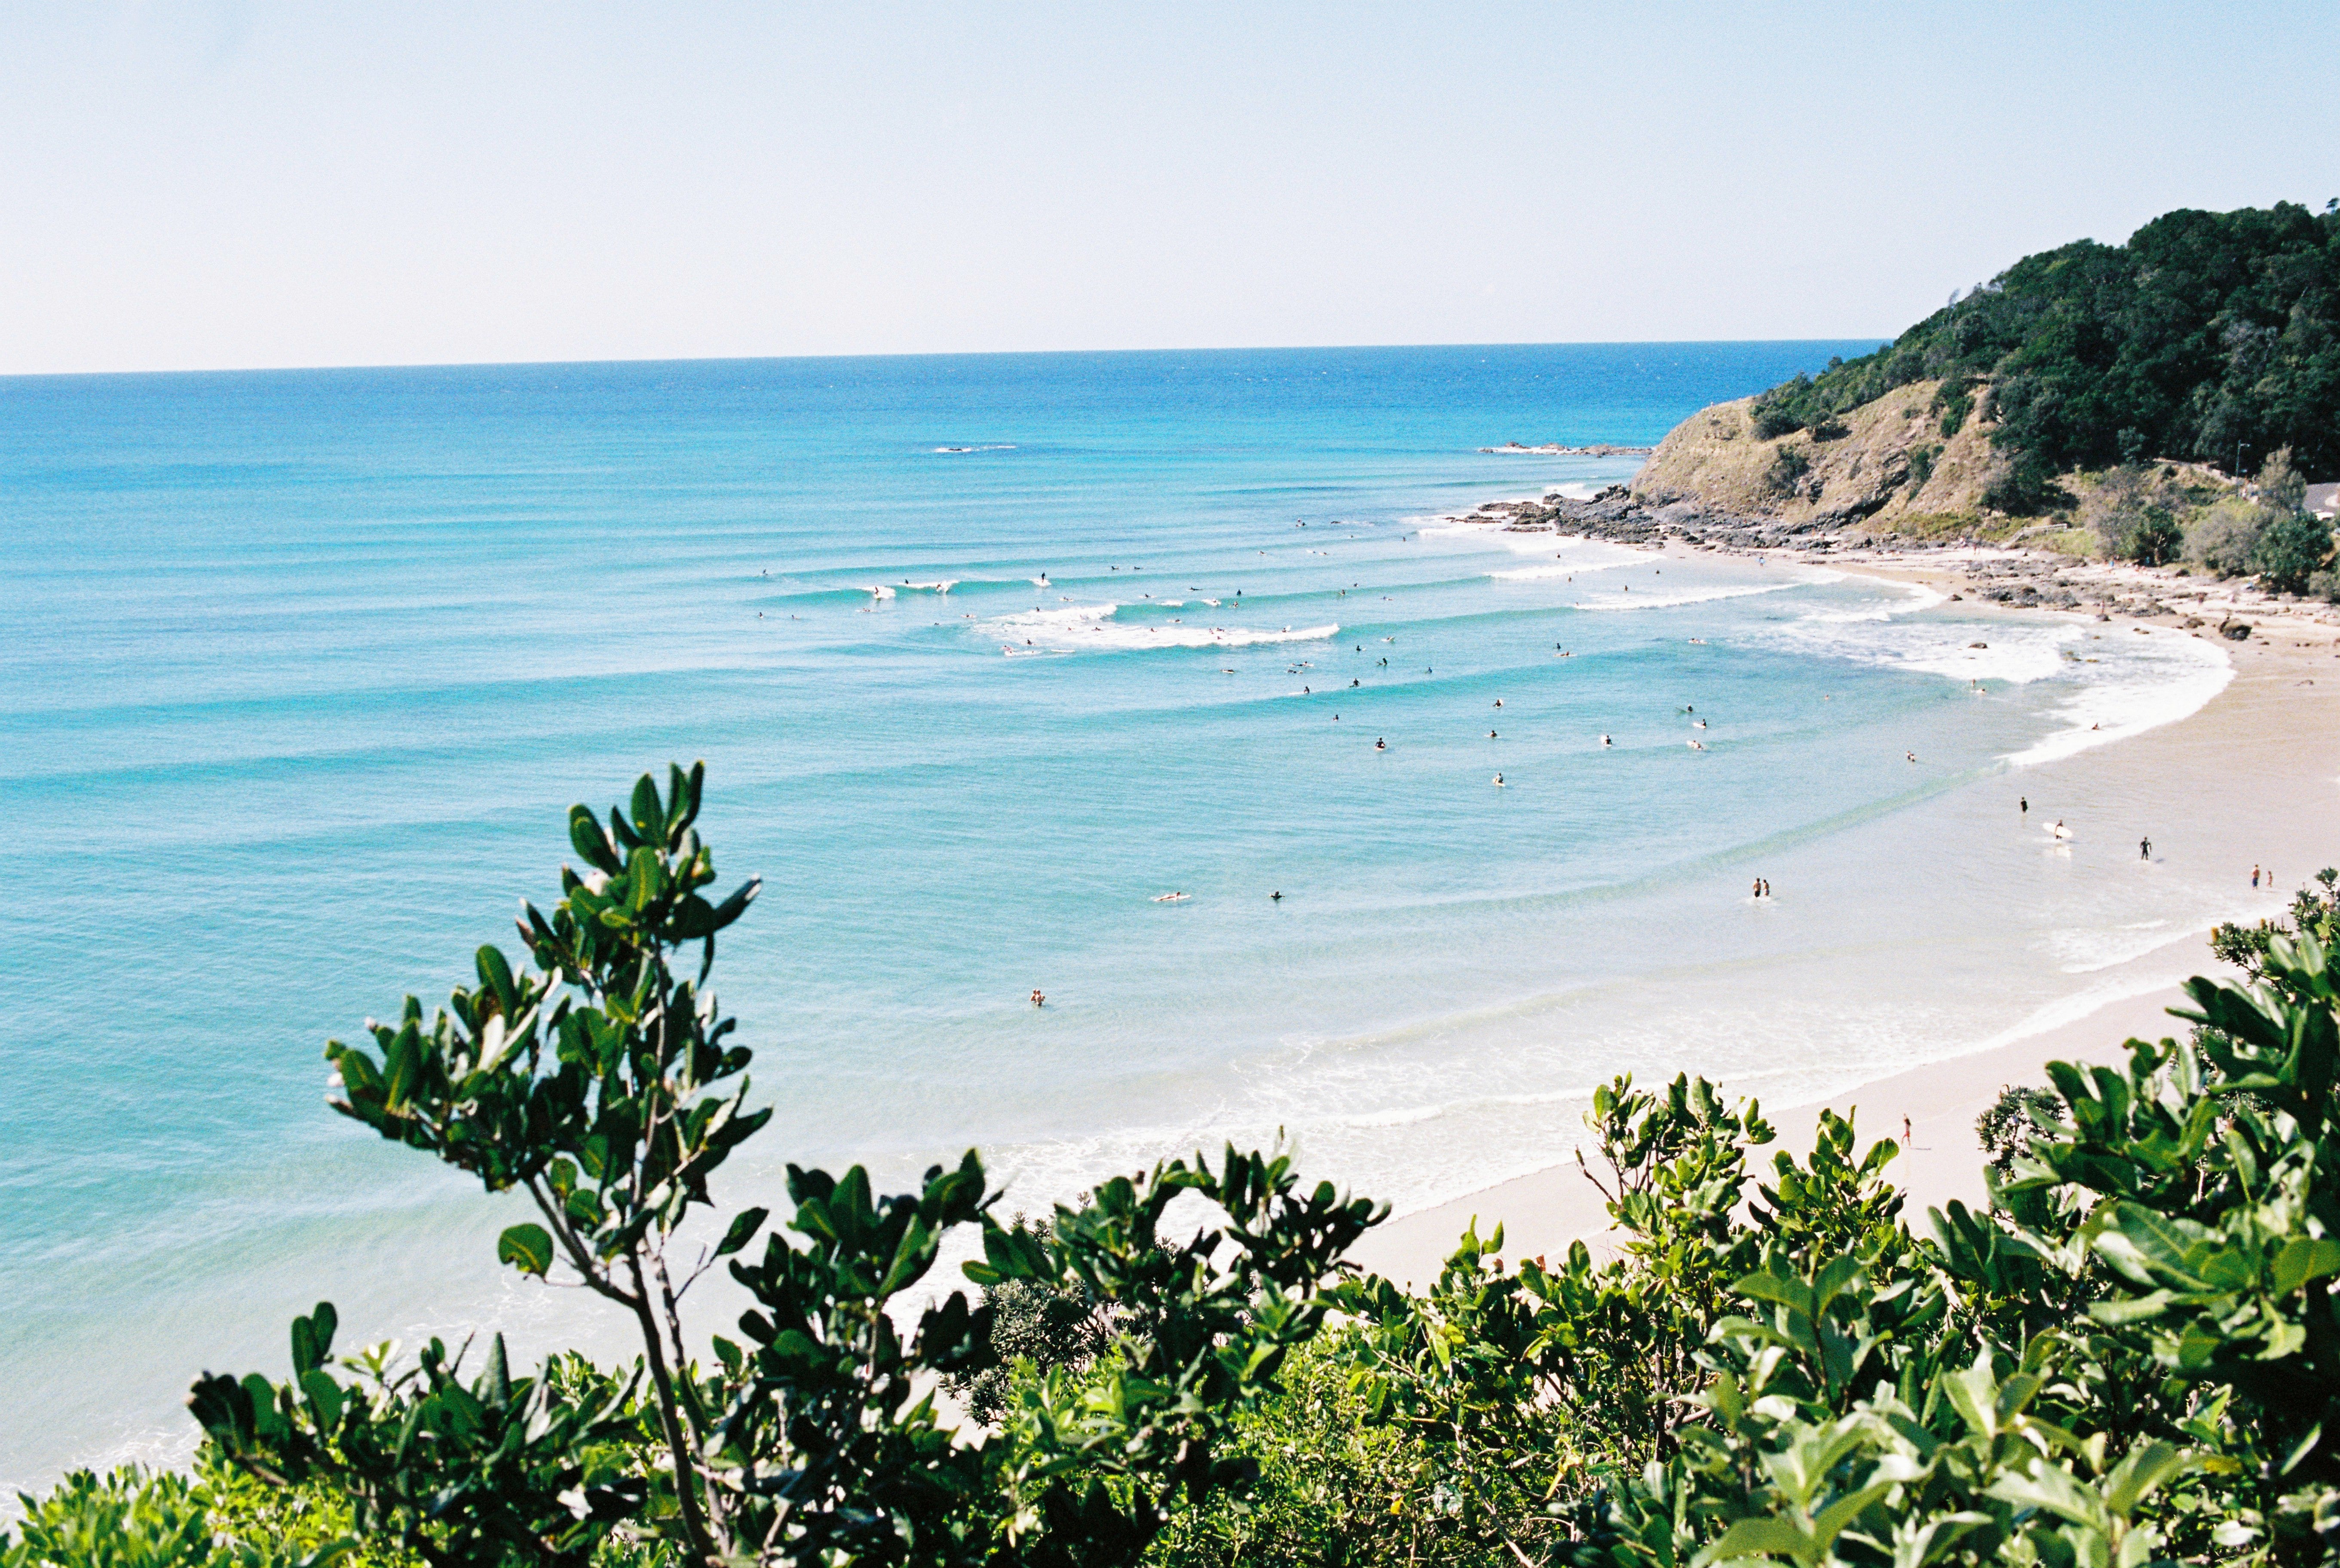 A photography of Wategos beach photographed from the hill. in Byron bay. People surfing in & the water is blue.